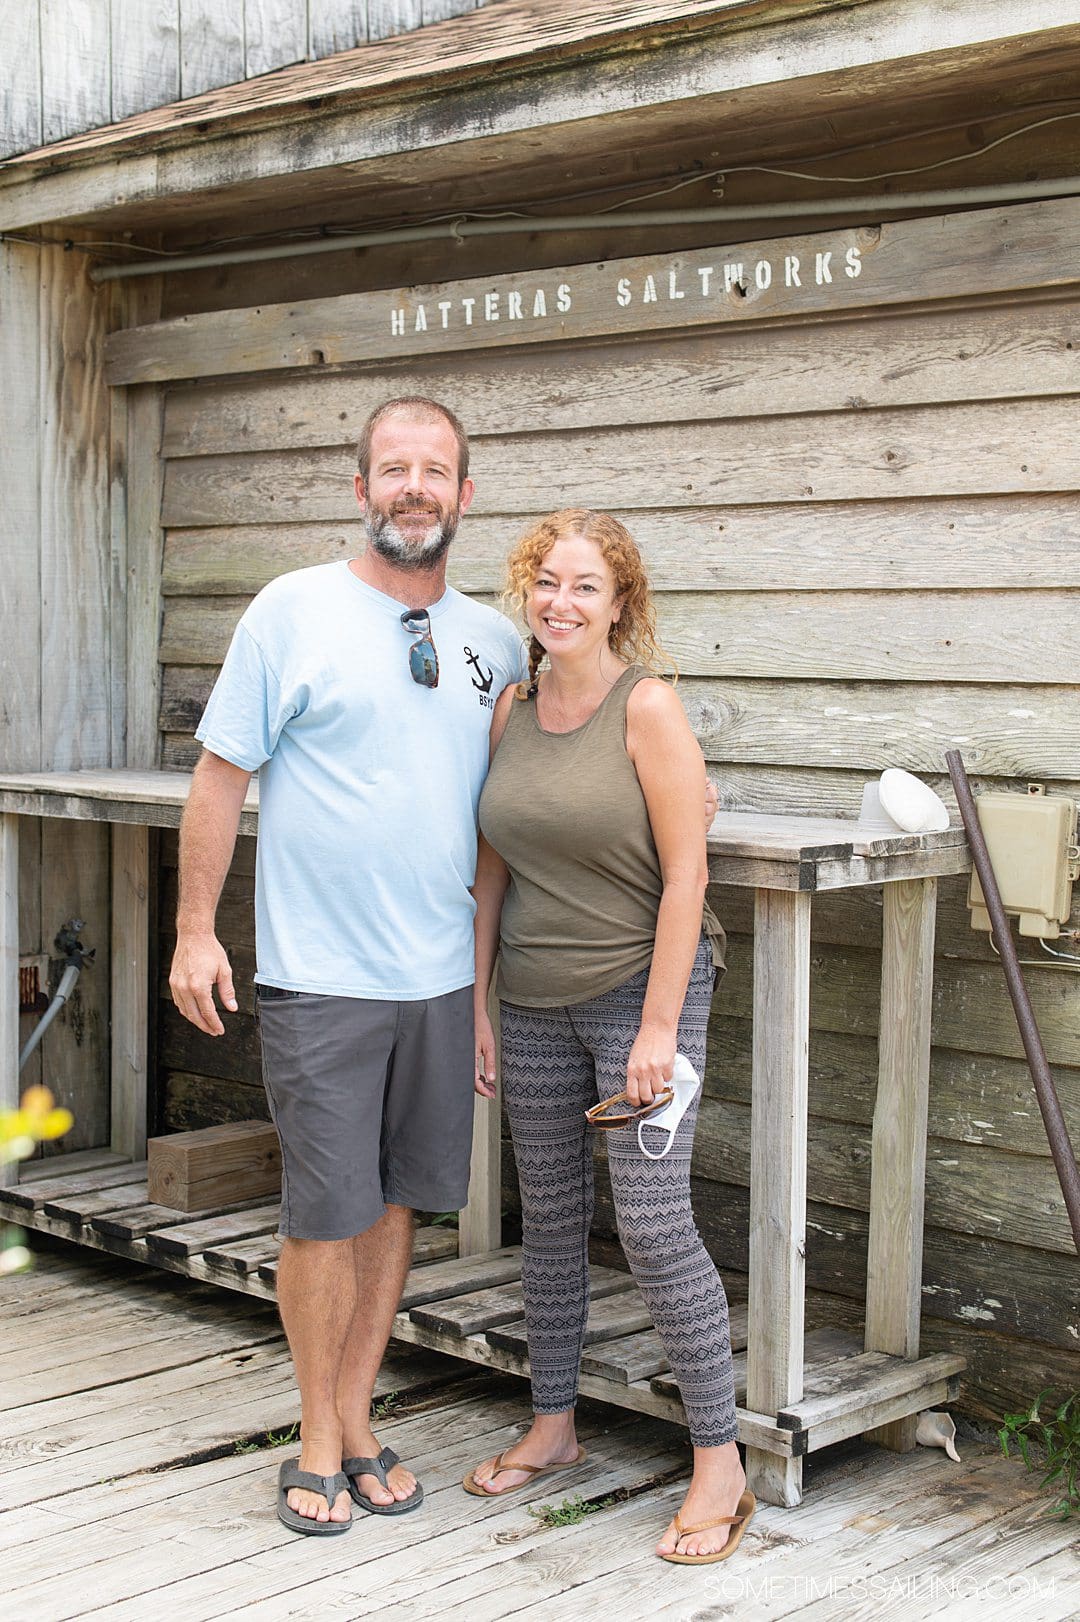 A man and woman in front of a wood wall that says "Hatteras Saltworks"